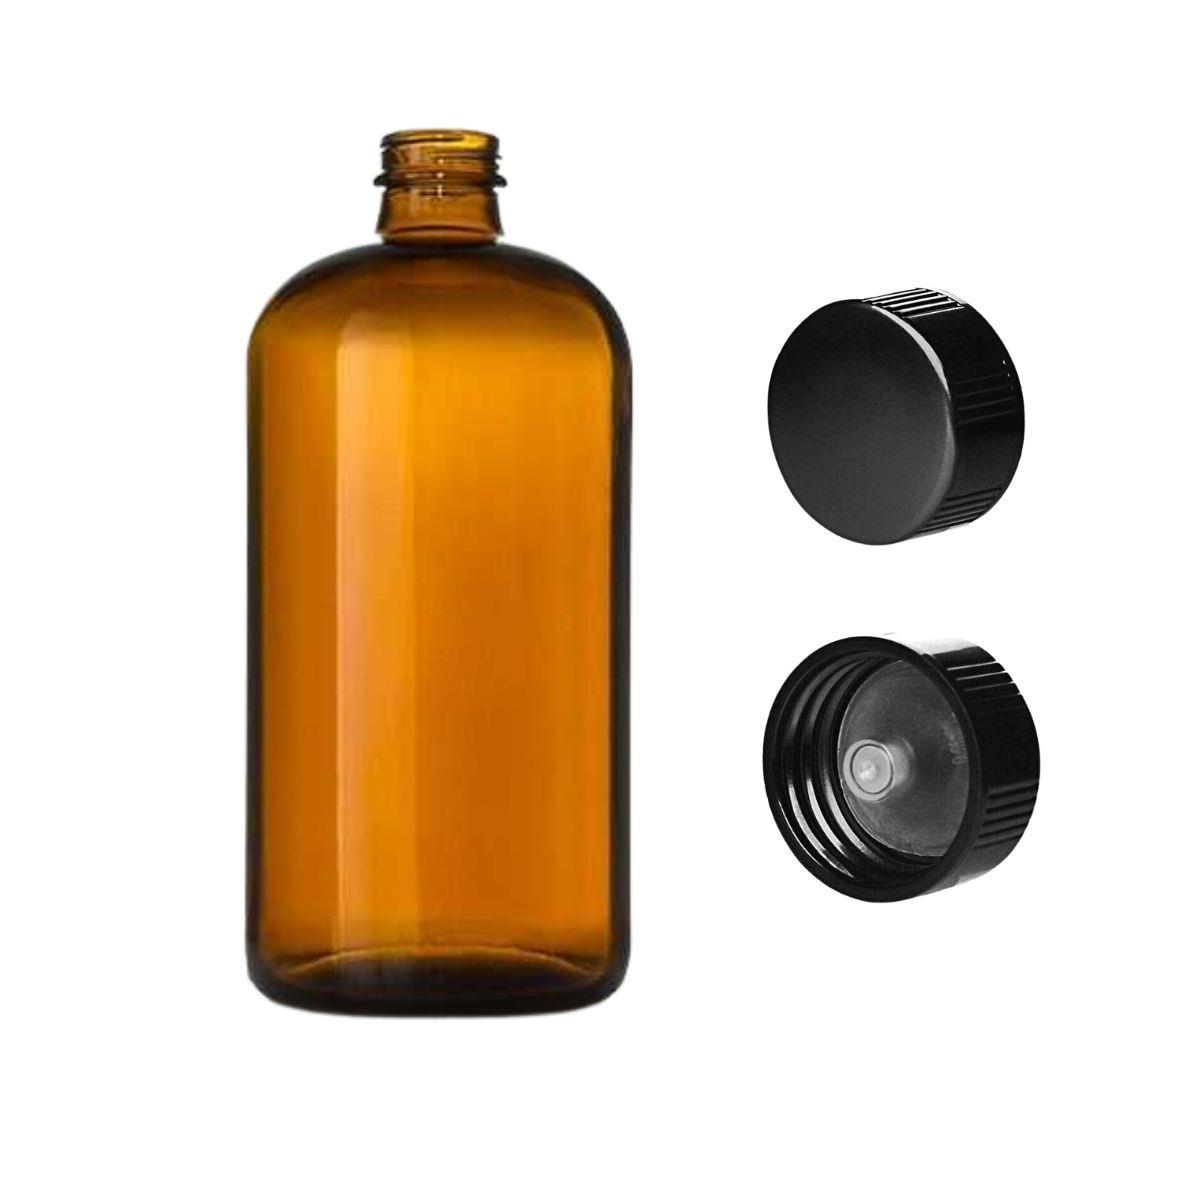 32 oz Amber Glass Bottle with Lid for sale